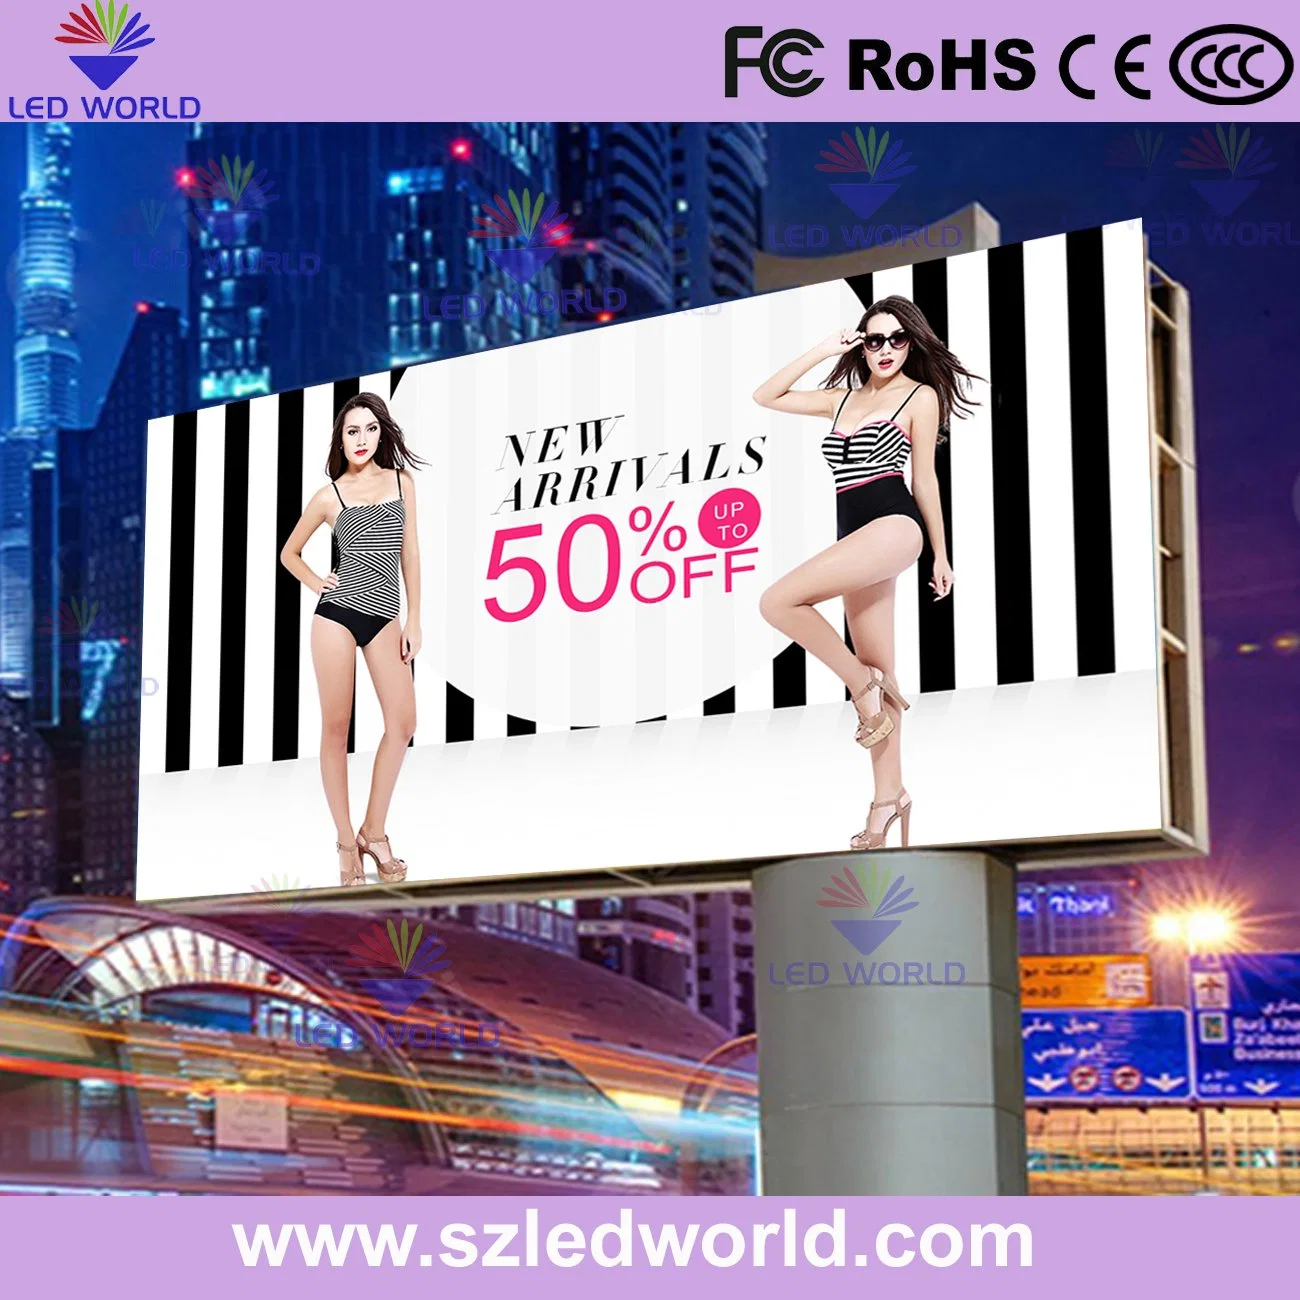 Digital Outdoor Indoor Advertising Full Color LED Display Screen Sign Video Wall Electronic Signage Poster Vehicle Pole 3D Billboard Price P10/P8/P6/P5/P4/P3/P2